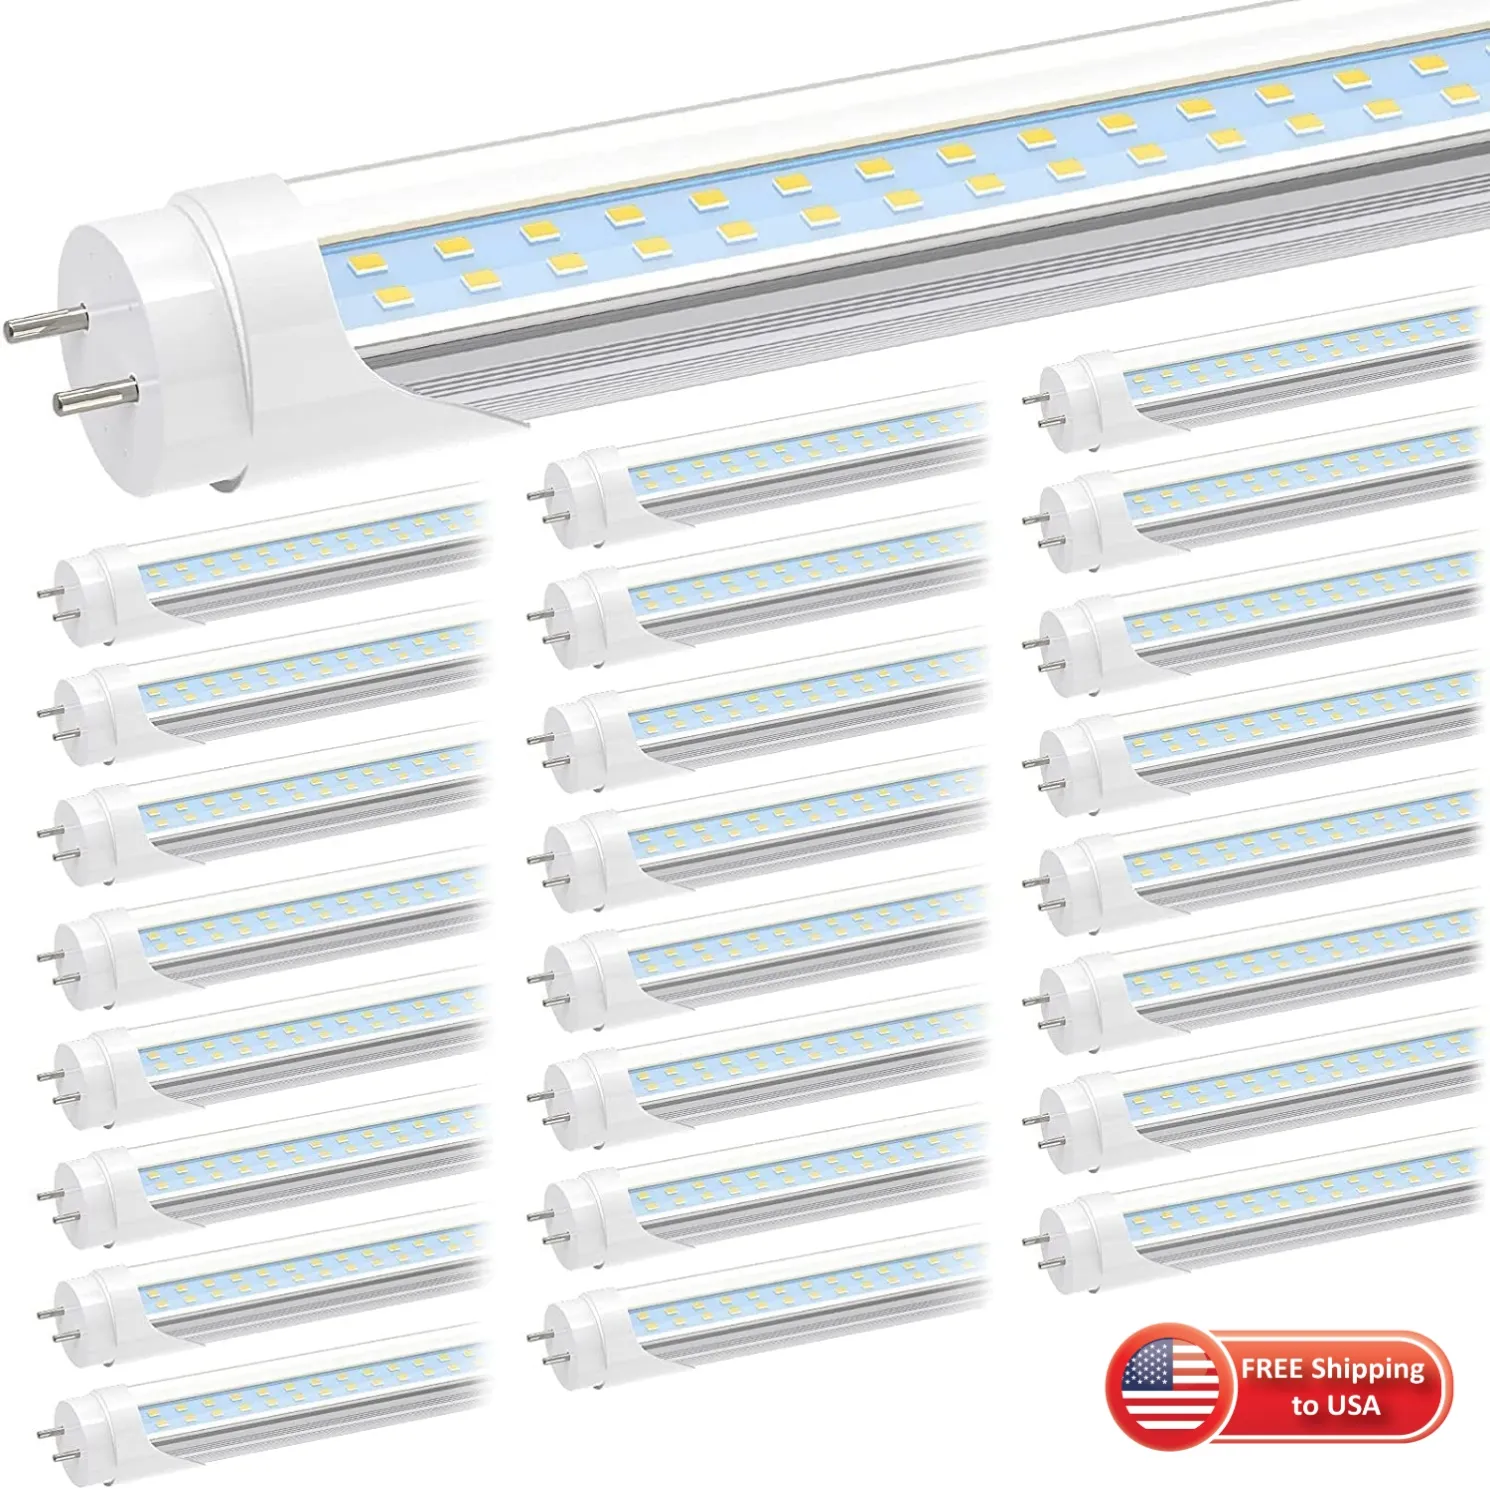 Stock In USA+4ft led tube t8 light 25w 22W 28w Warm Cool White 1200mm 4ft SMD2835 Super Bright Led Fluorescent Bulbs replacement ballast bypass for shop garage